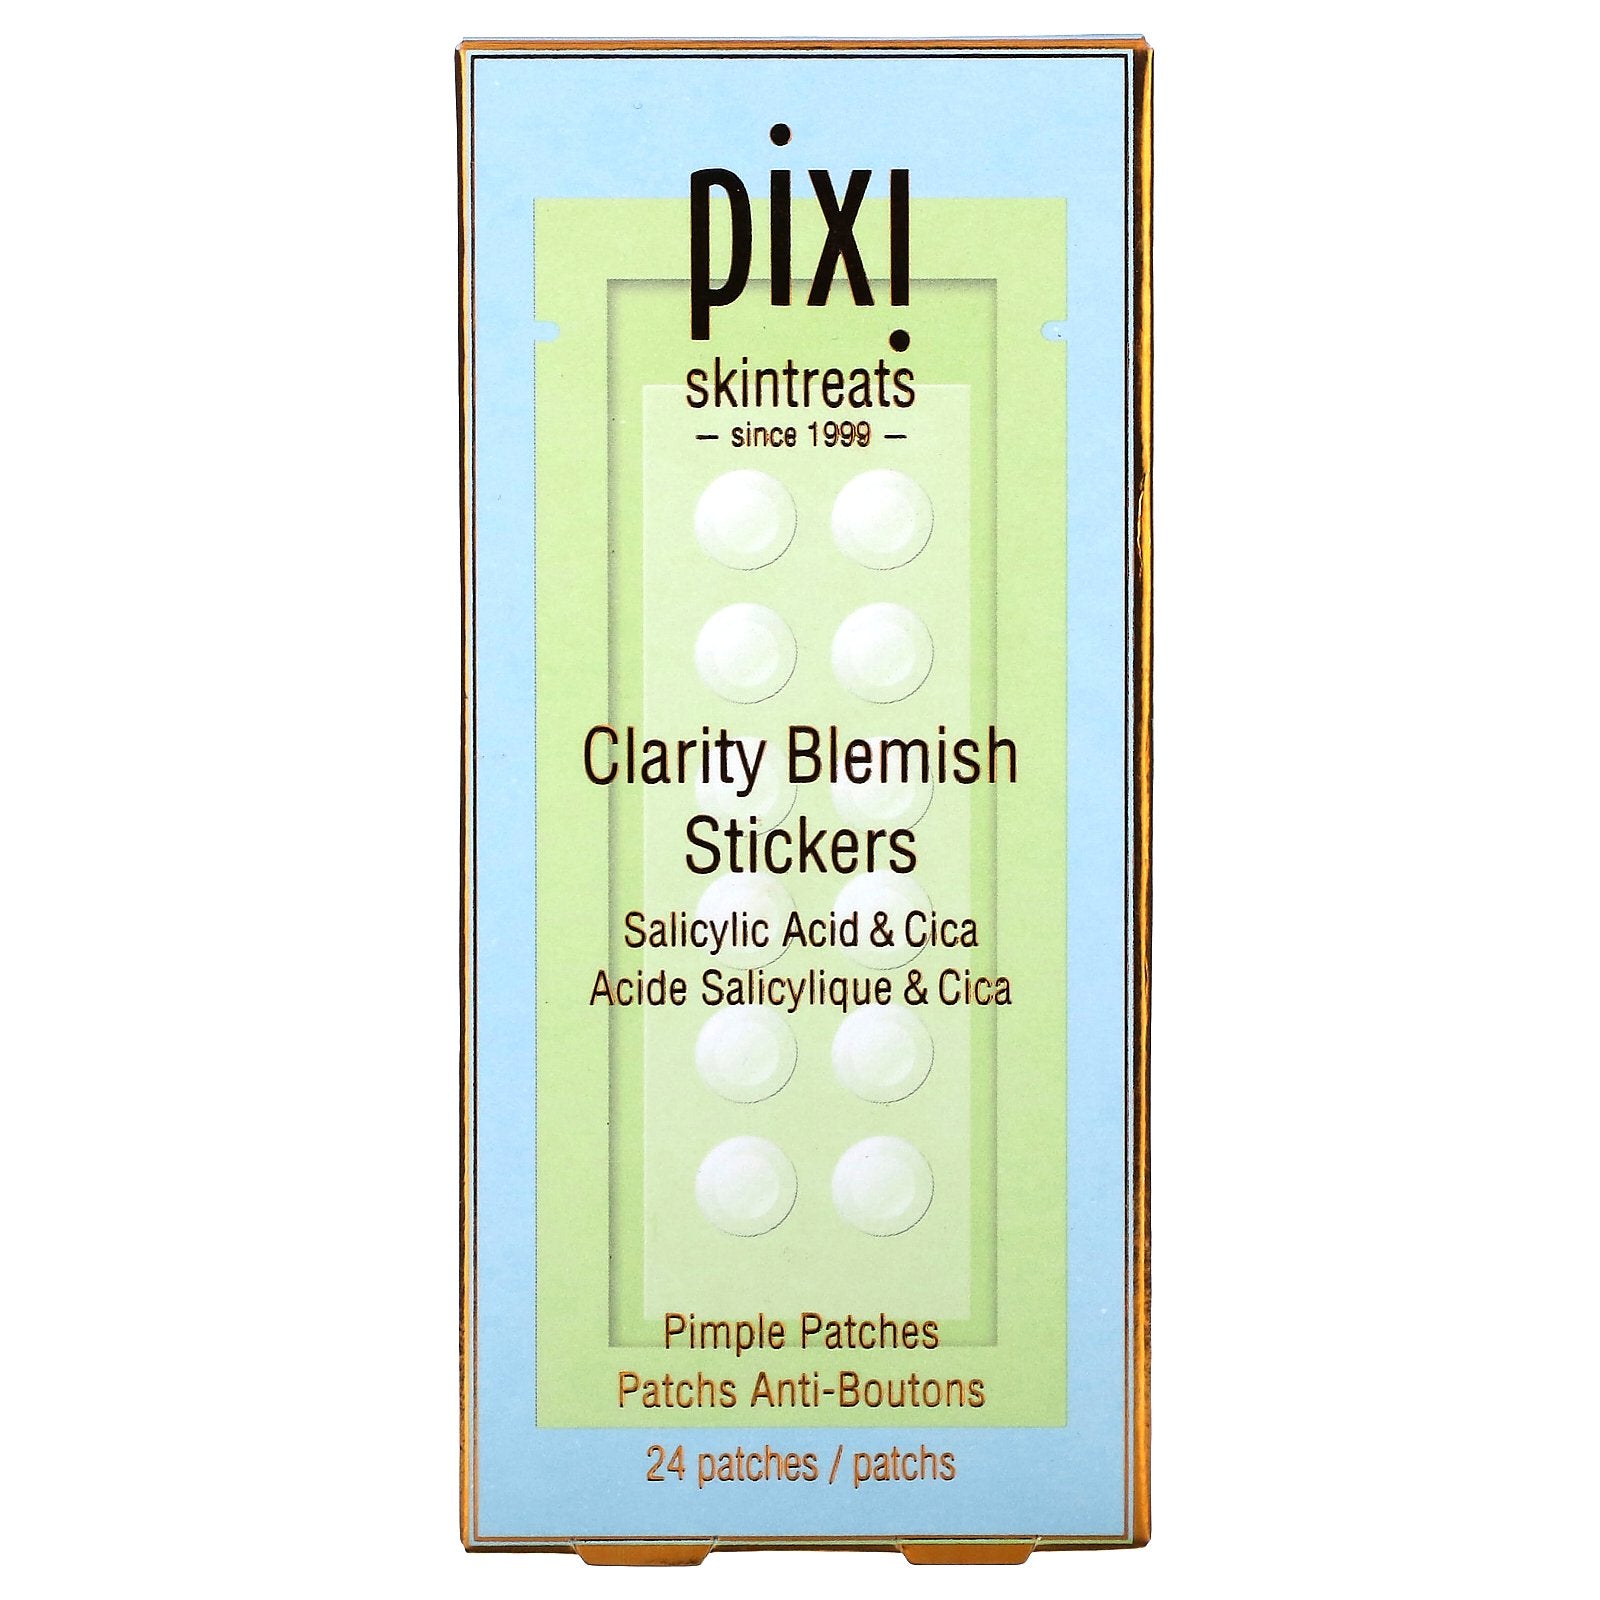 Pixi Beauty, Skintreats, Clarity Blemish Stickers, 24 Patches